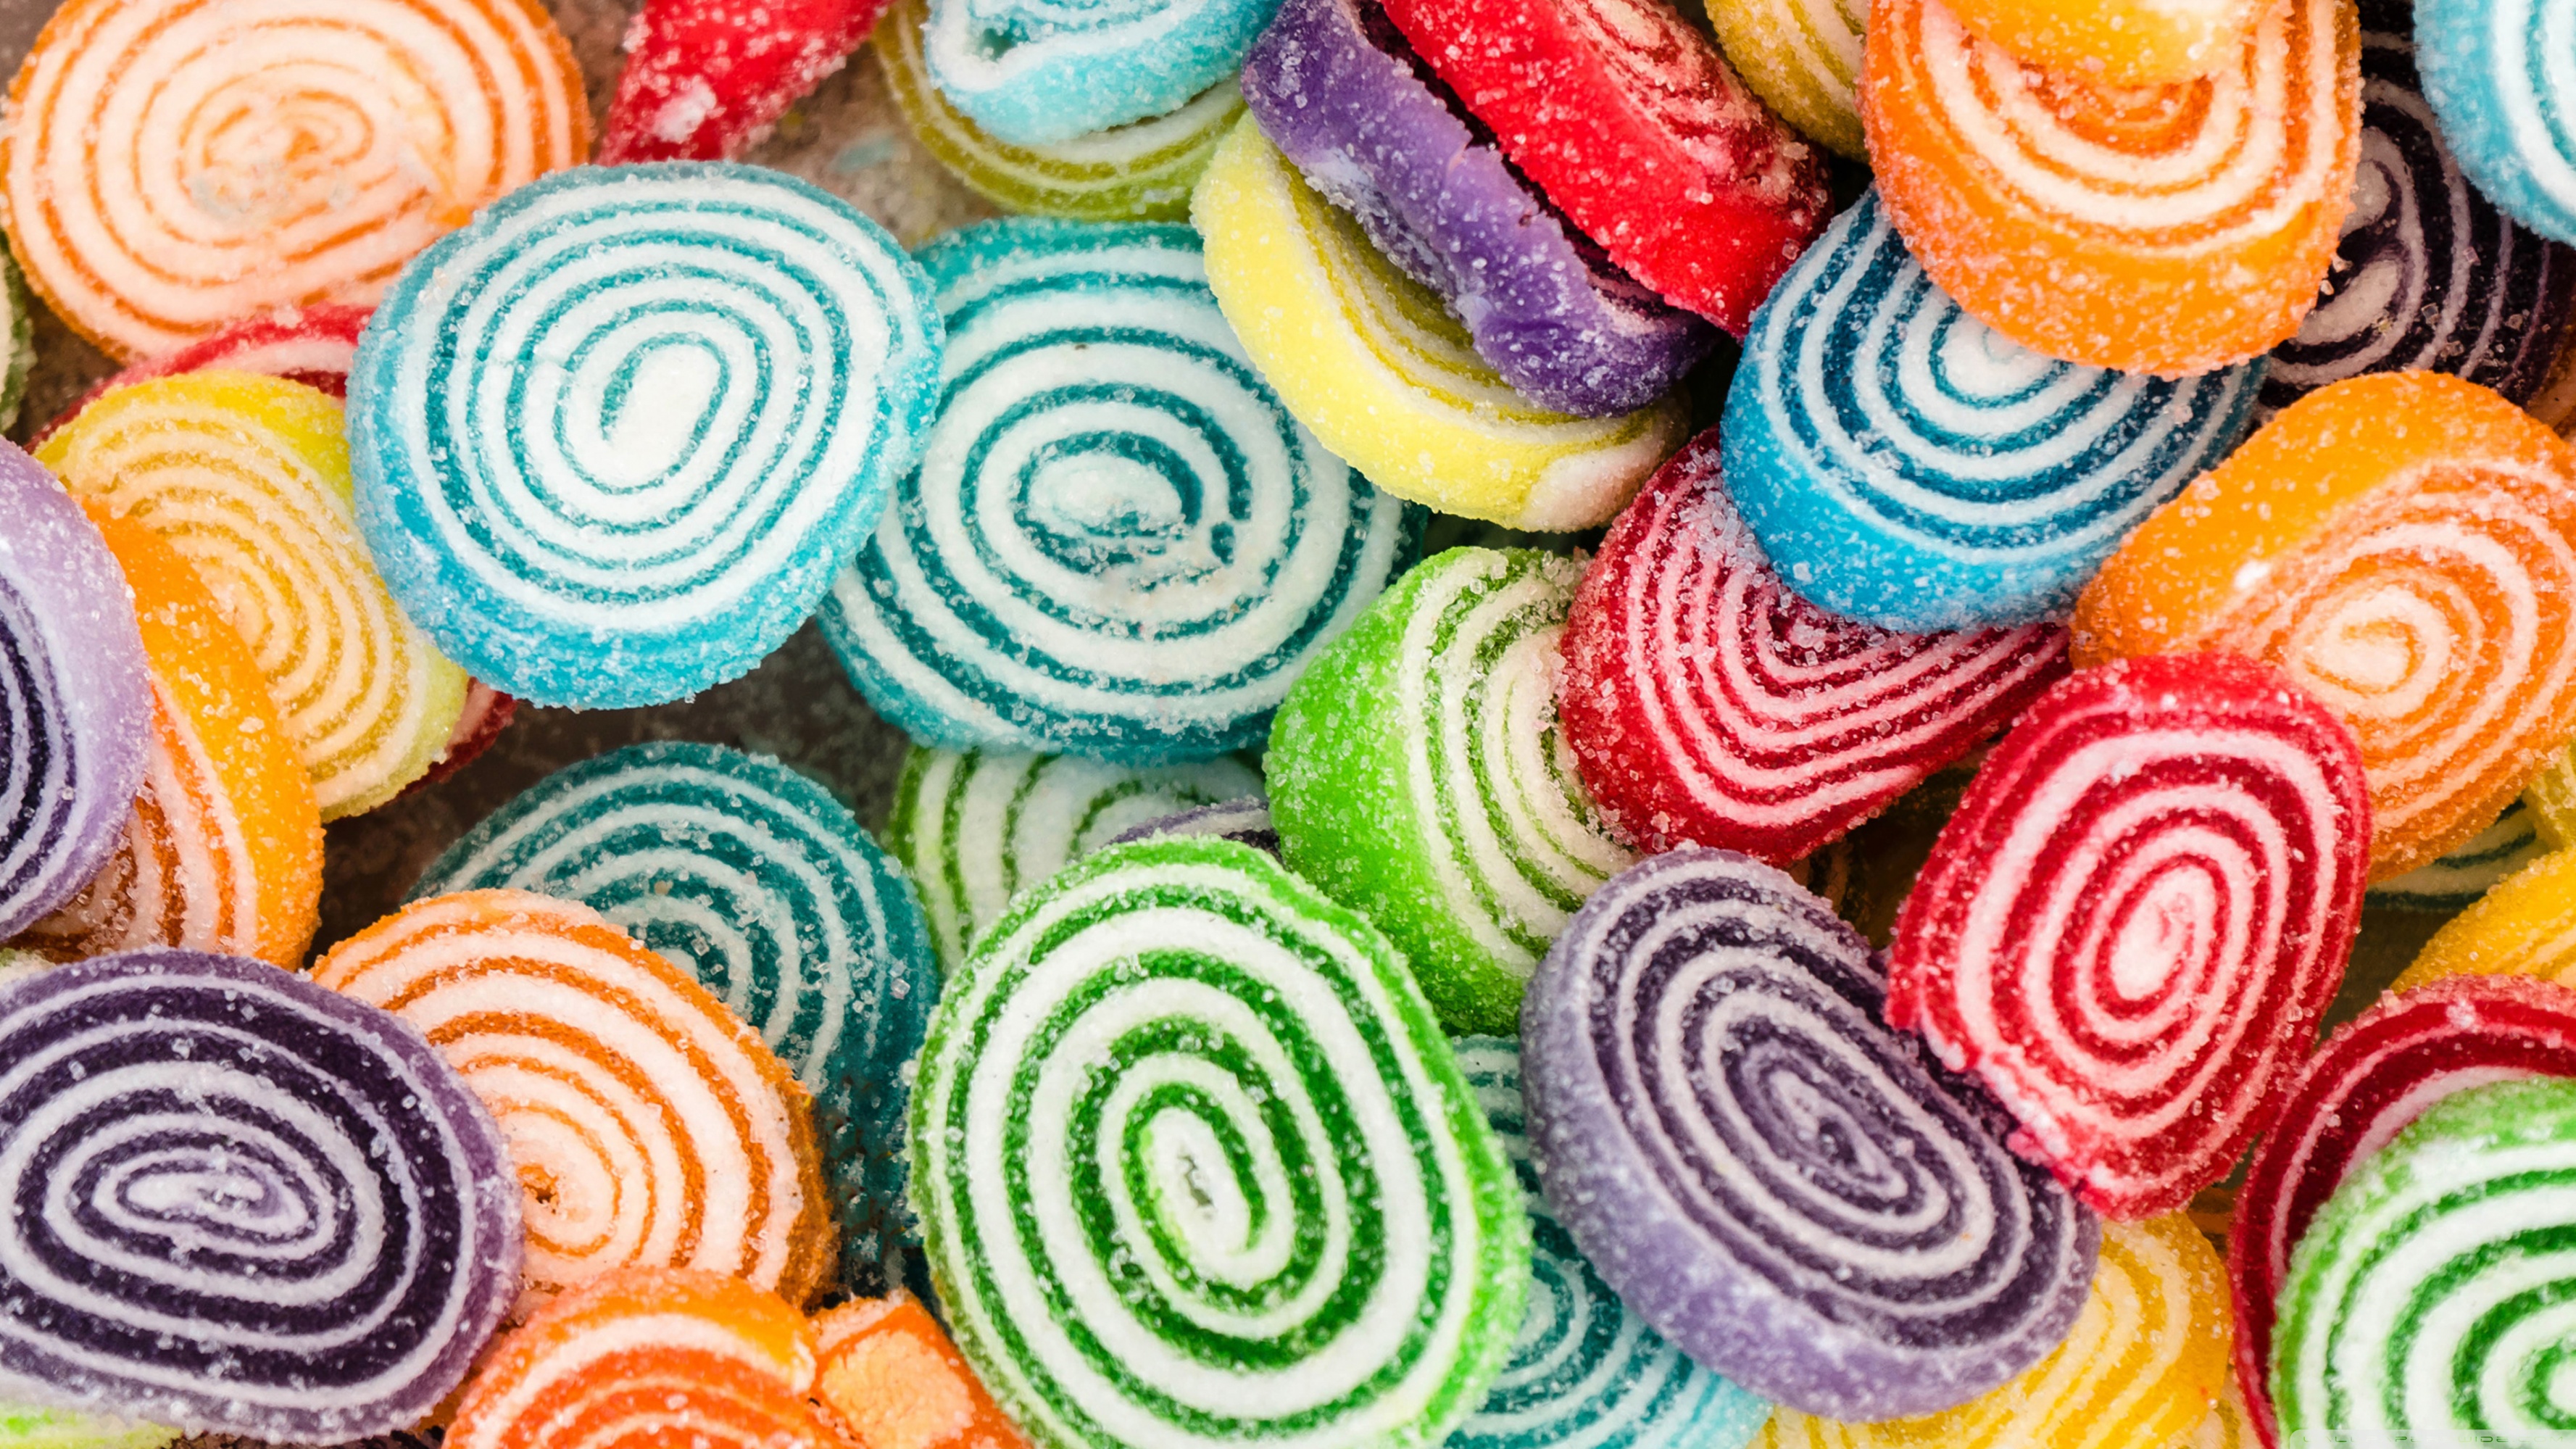 Candy of colors Wallpaper